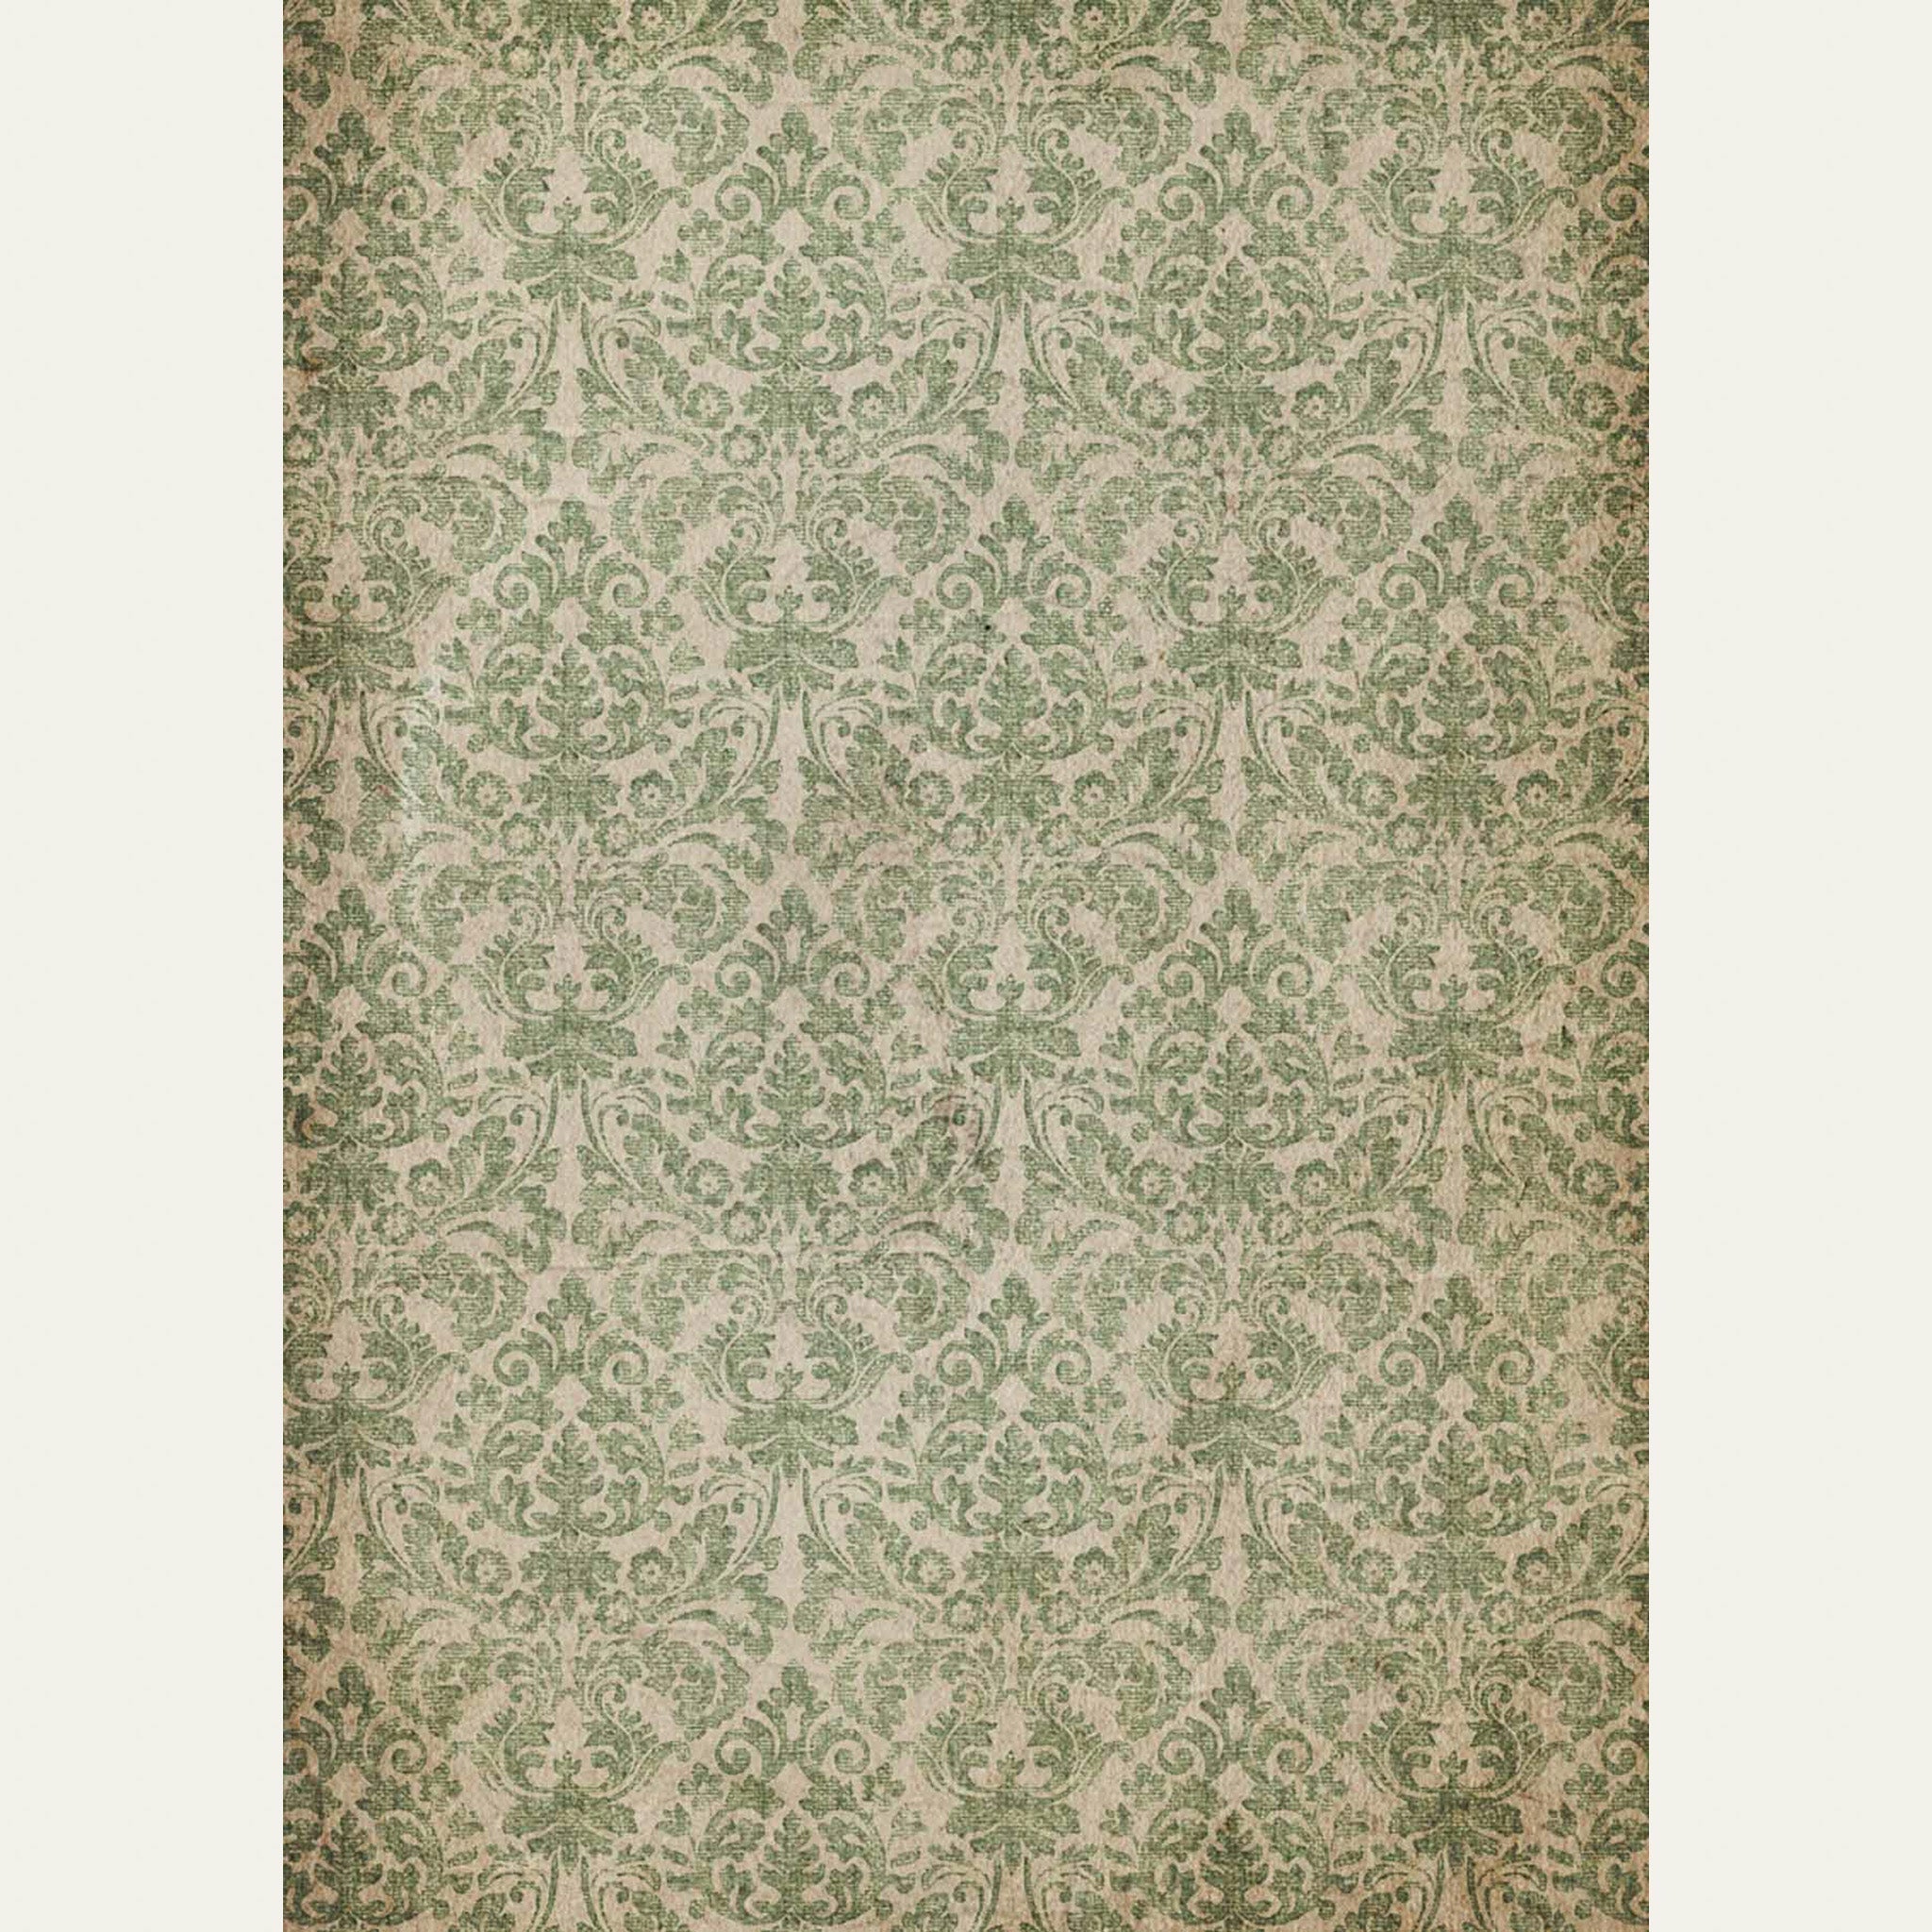 Vintage style Wallpaper Damask A0 Decoupage Rice Paper. White borders on the sides.